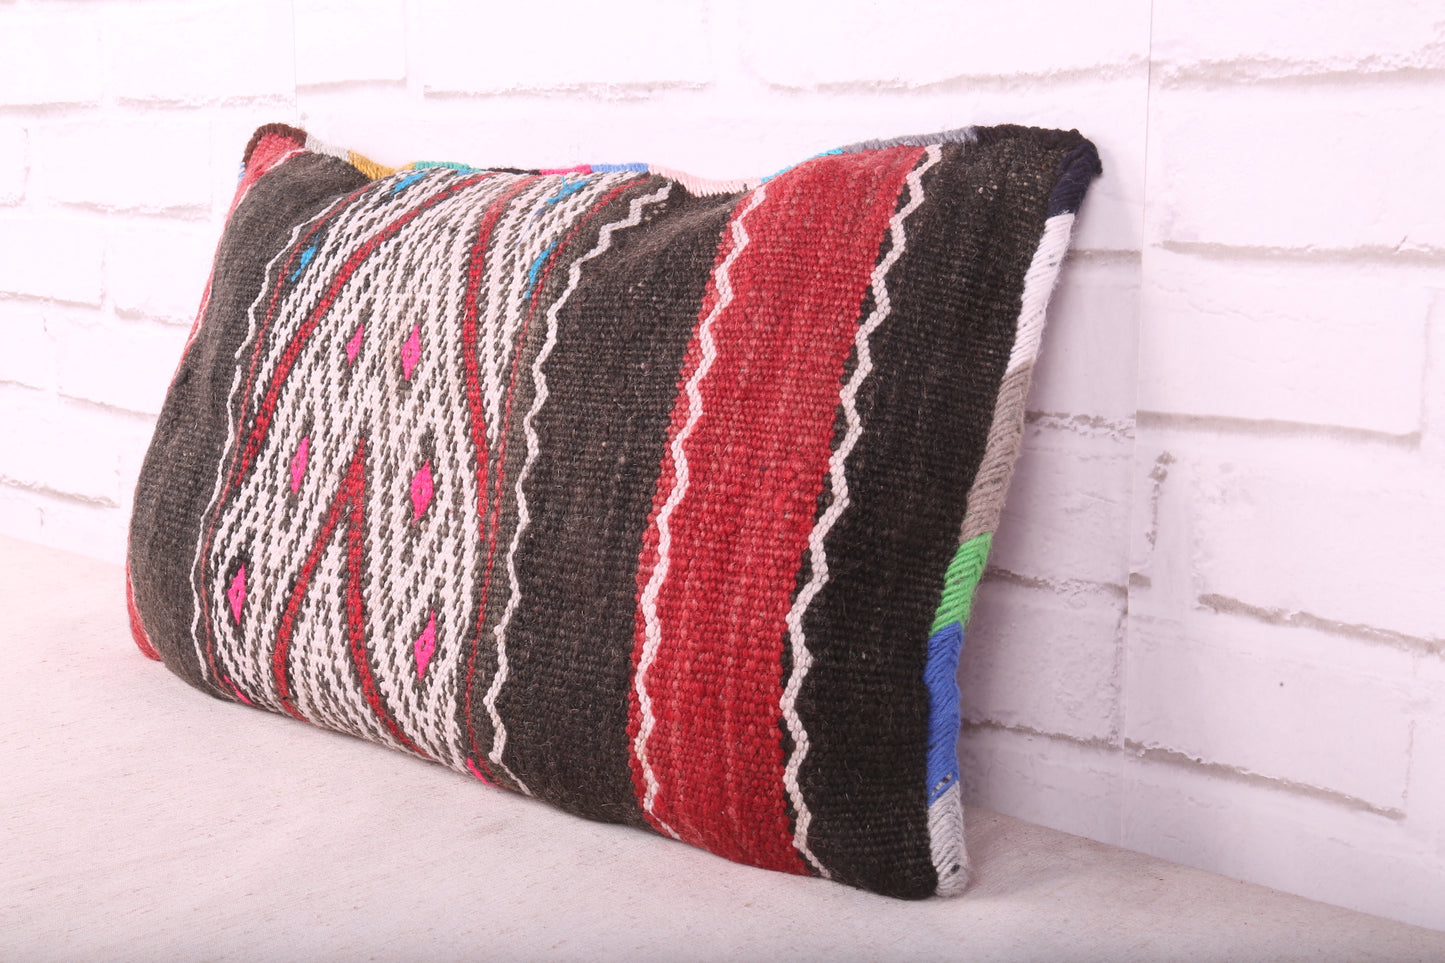 Moroccan pillow rug 12.5 inches X 20.8 inches